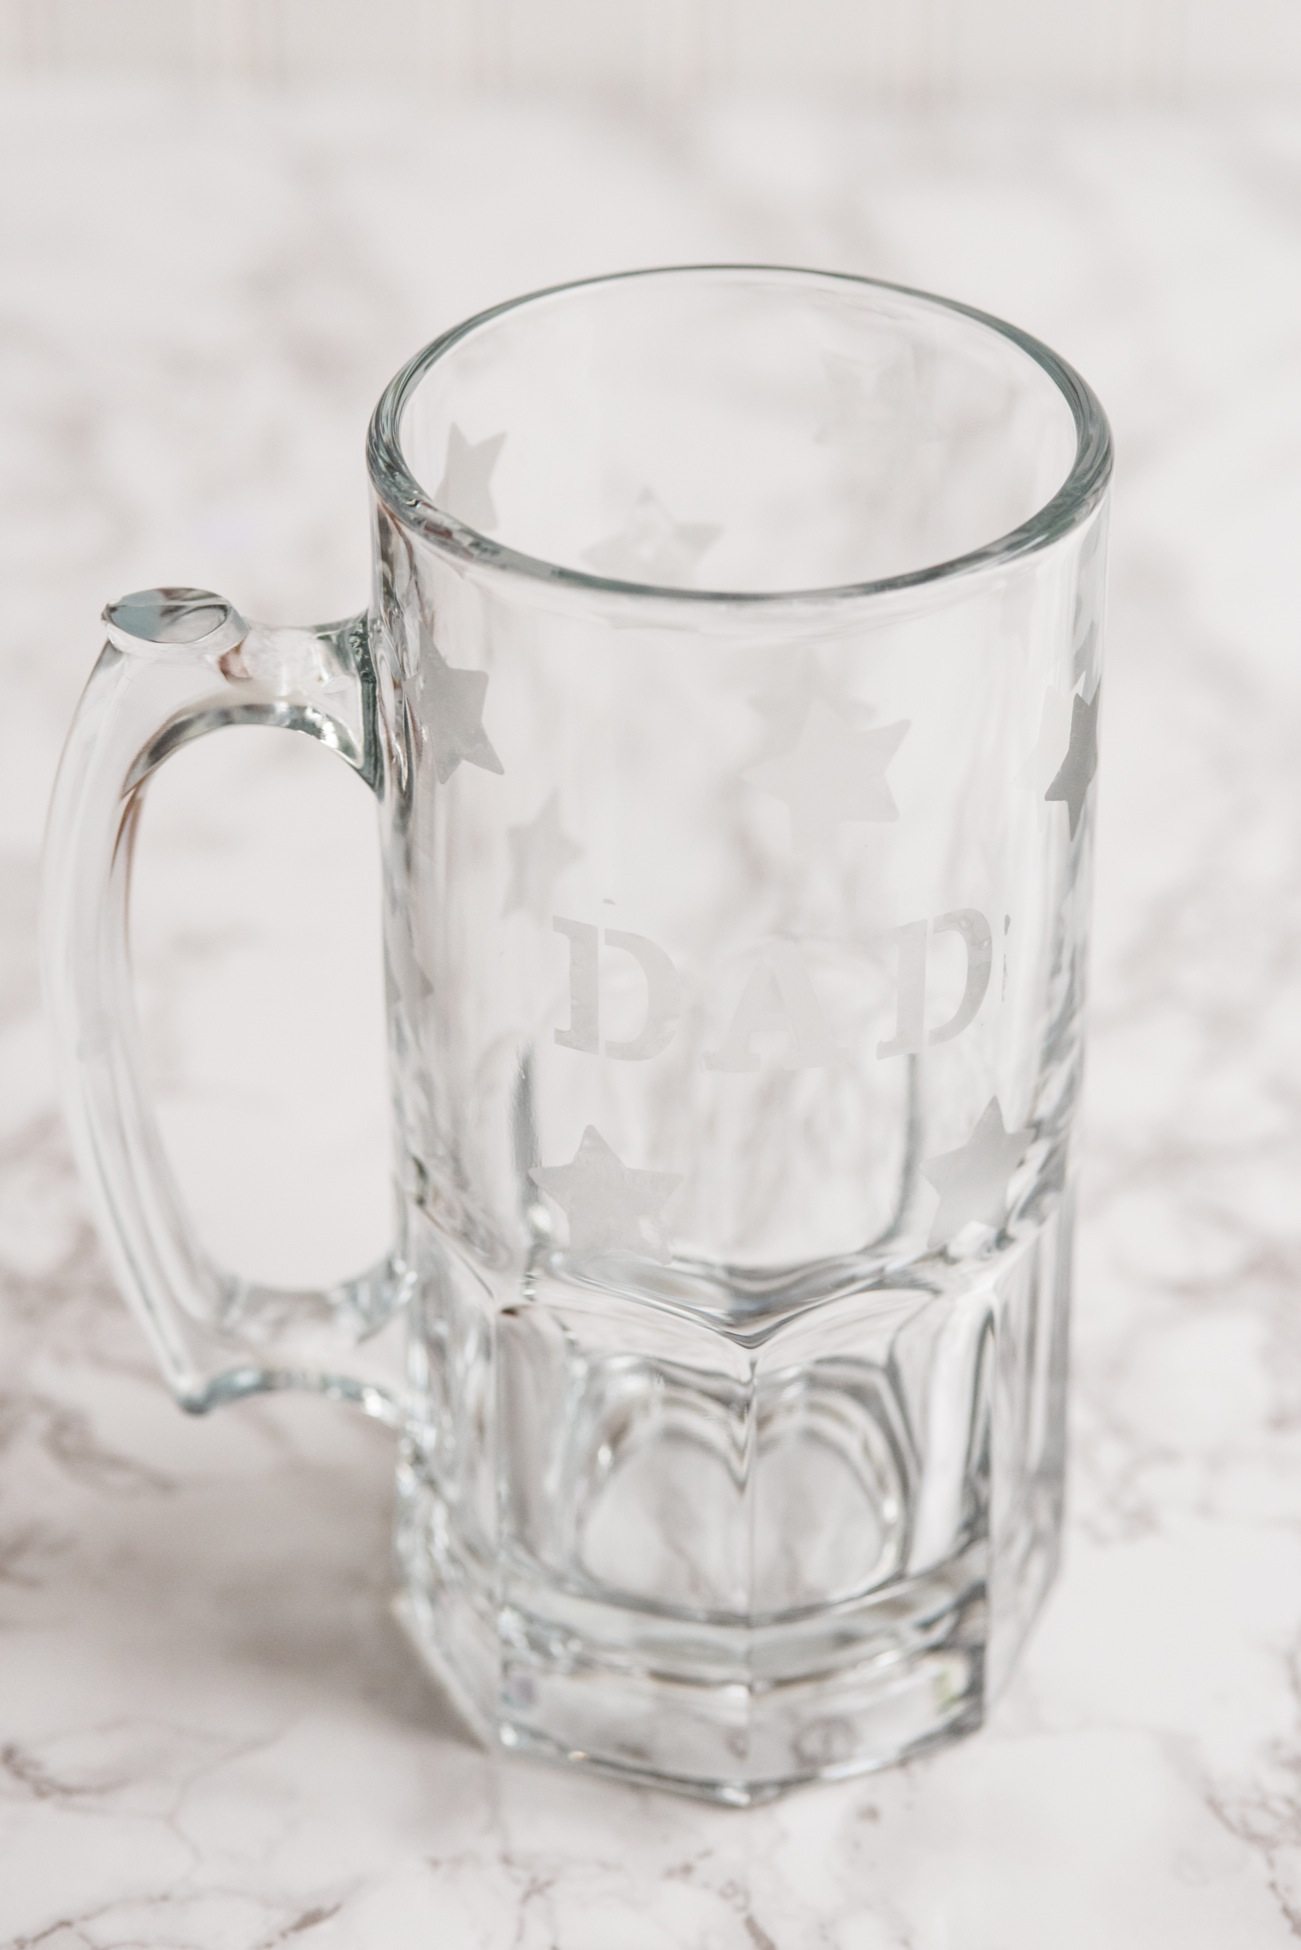 DIY Etched Beer Mugs for Father's Day | Father's Day gift ideas, DIY projects, homemade gifts ideas, homemade Father's Day gifts, entertaining tips and more from @cydconverse